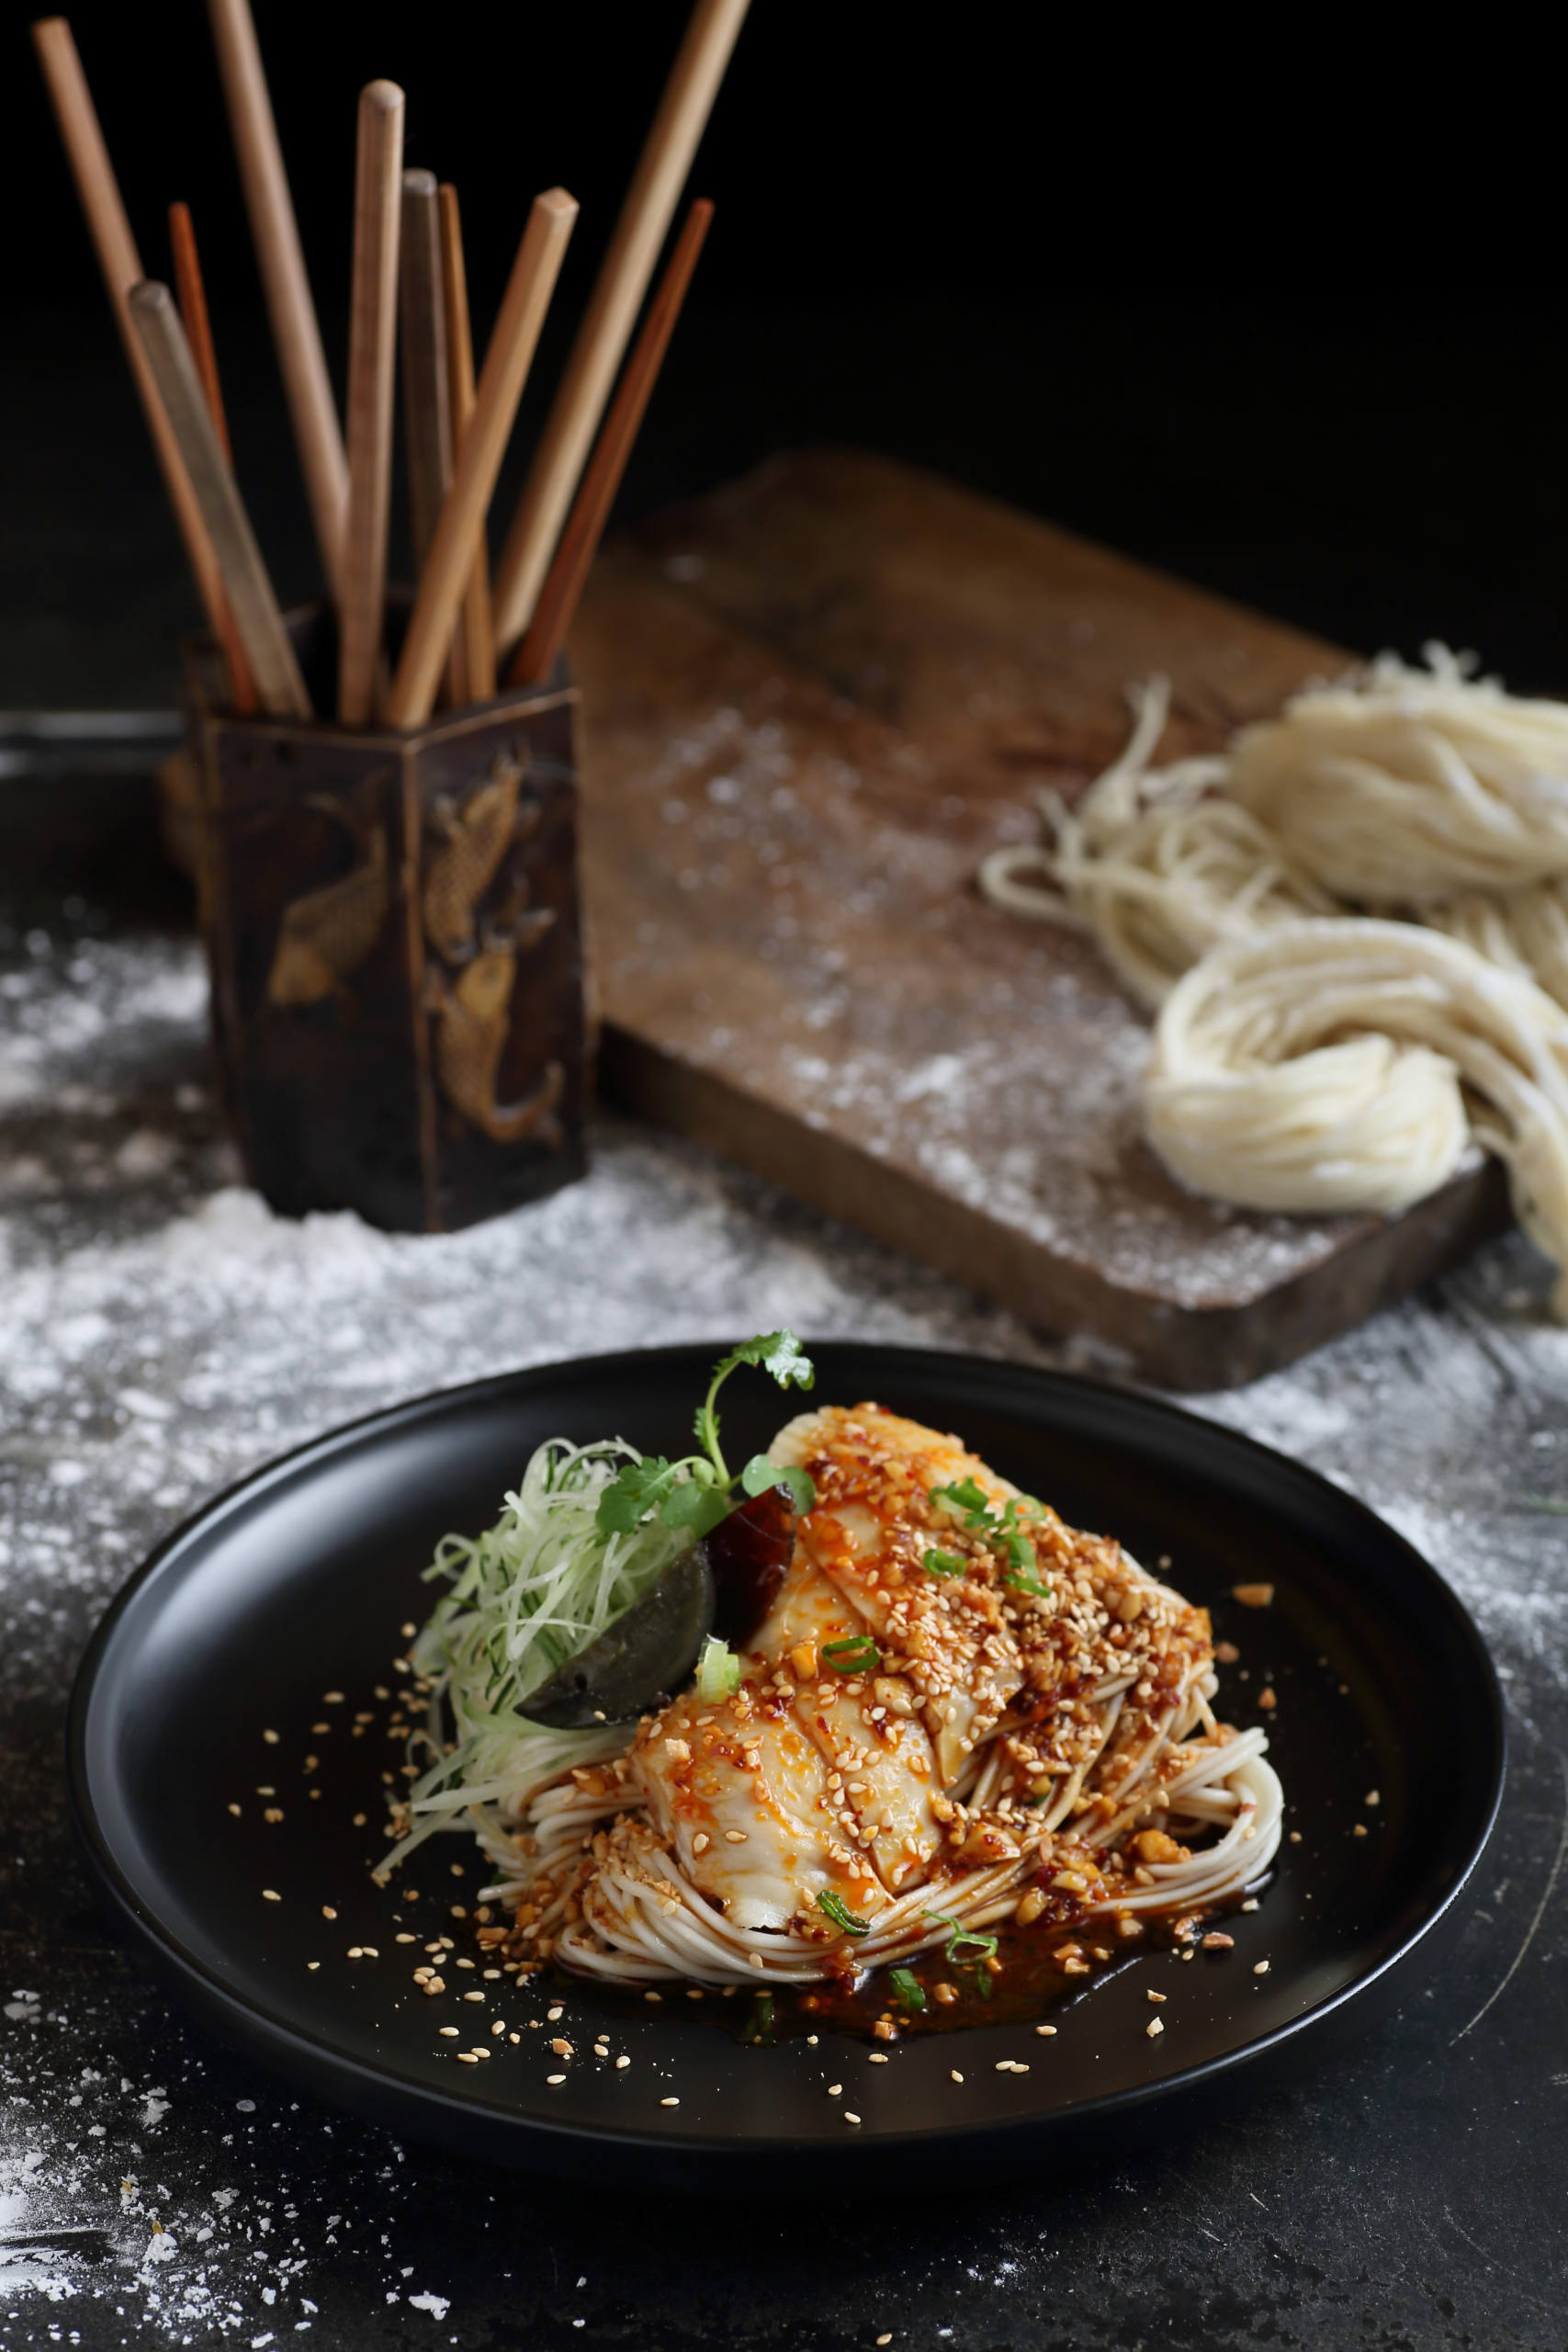 Crystal Jade La Mian Xiao Long Bao's La Mian with Chilled Poached Chicken in Szechuan Style2, delivered islandwide in Singapore powered by Oddle.